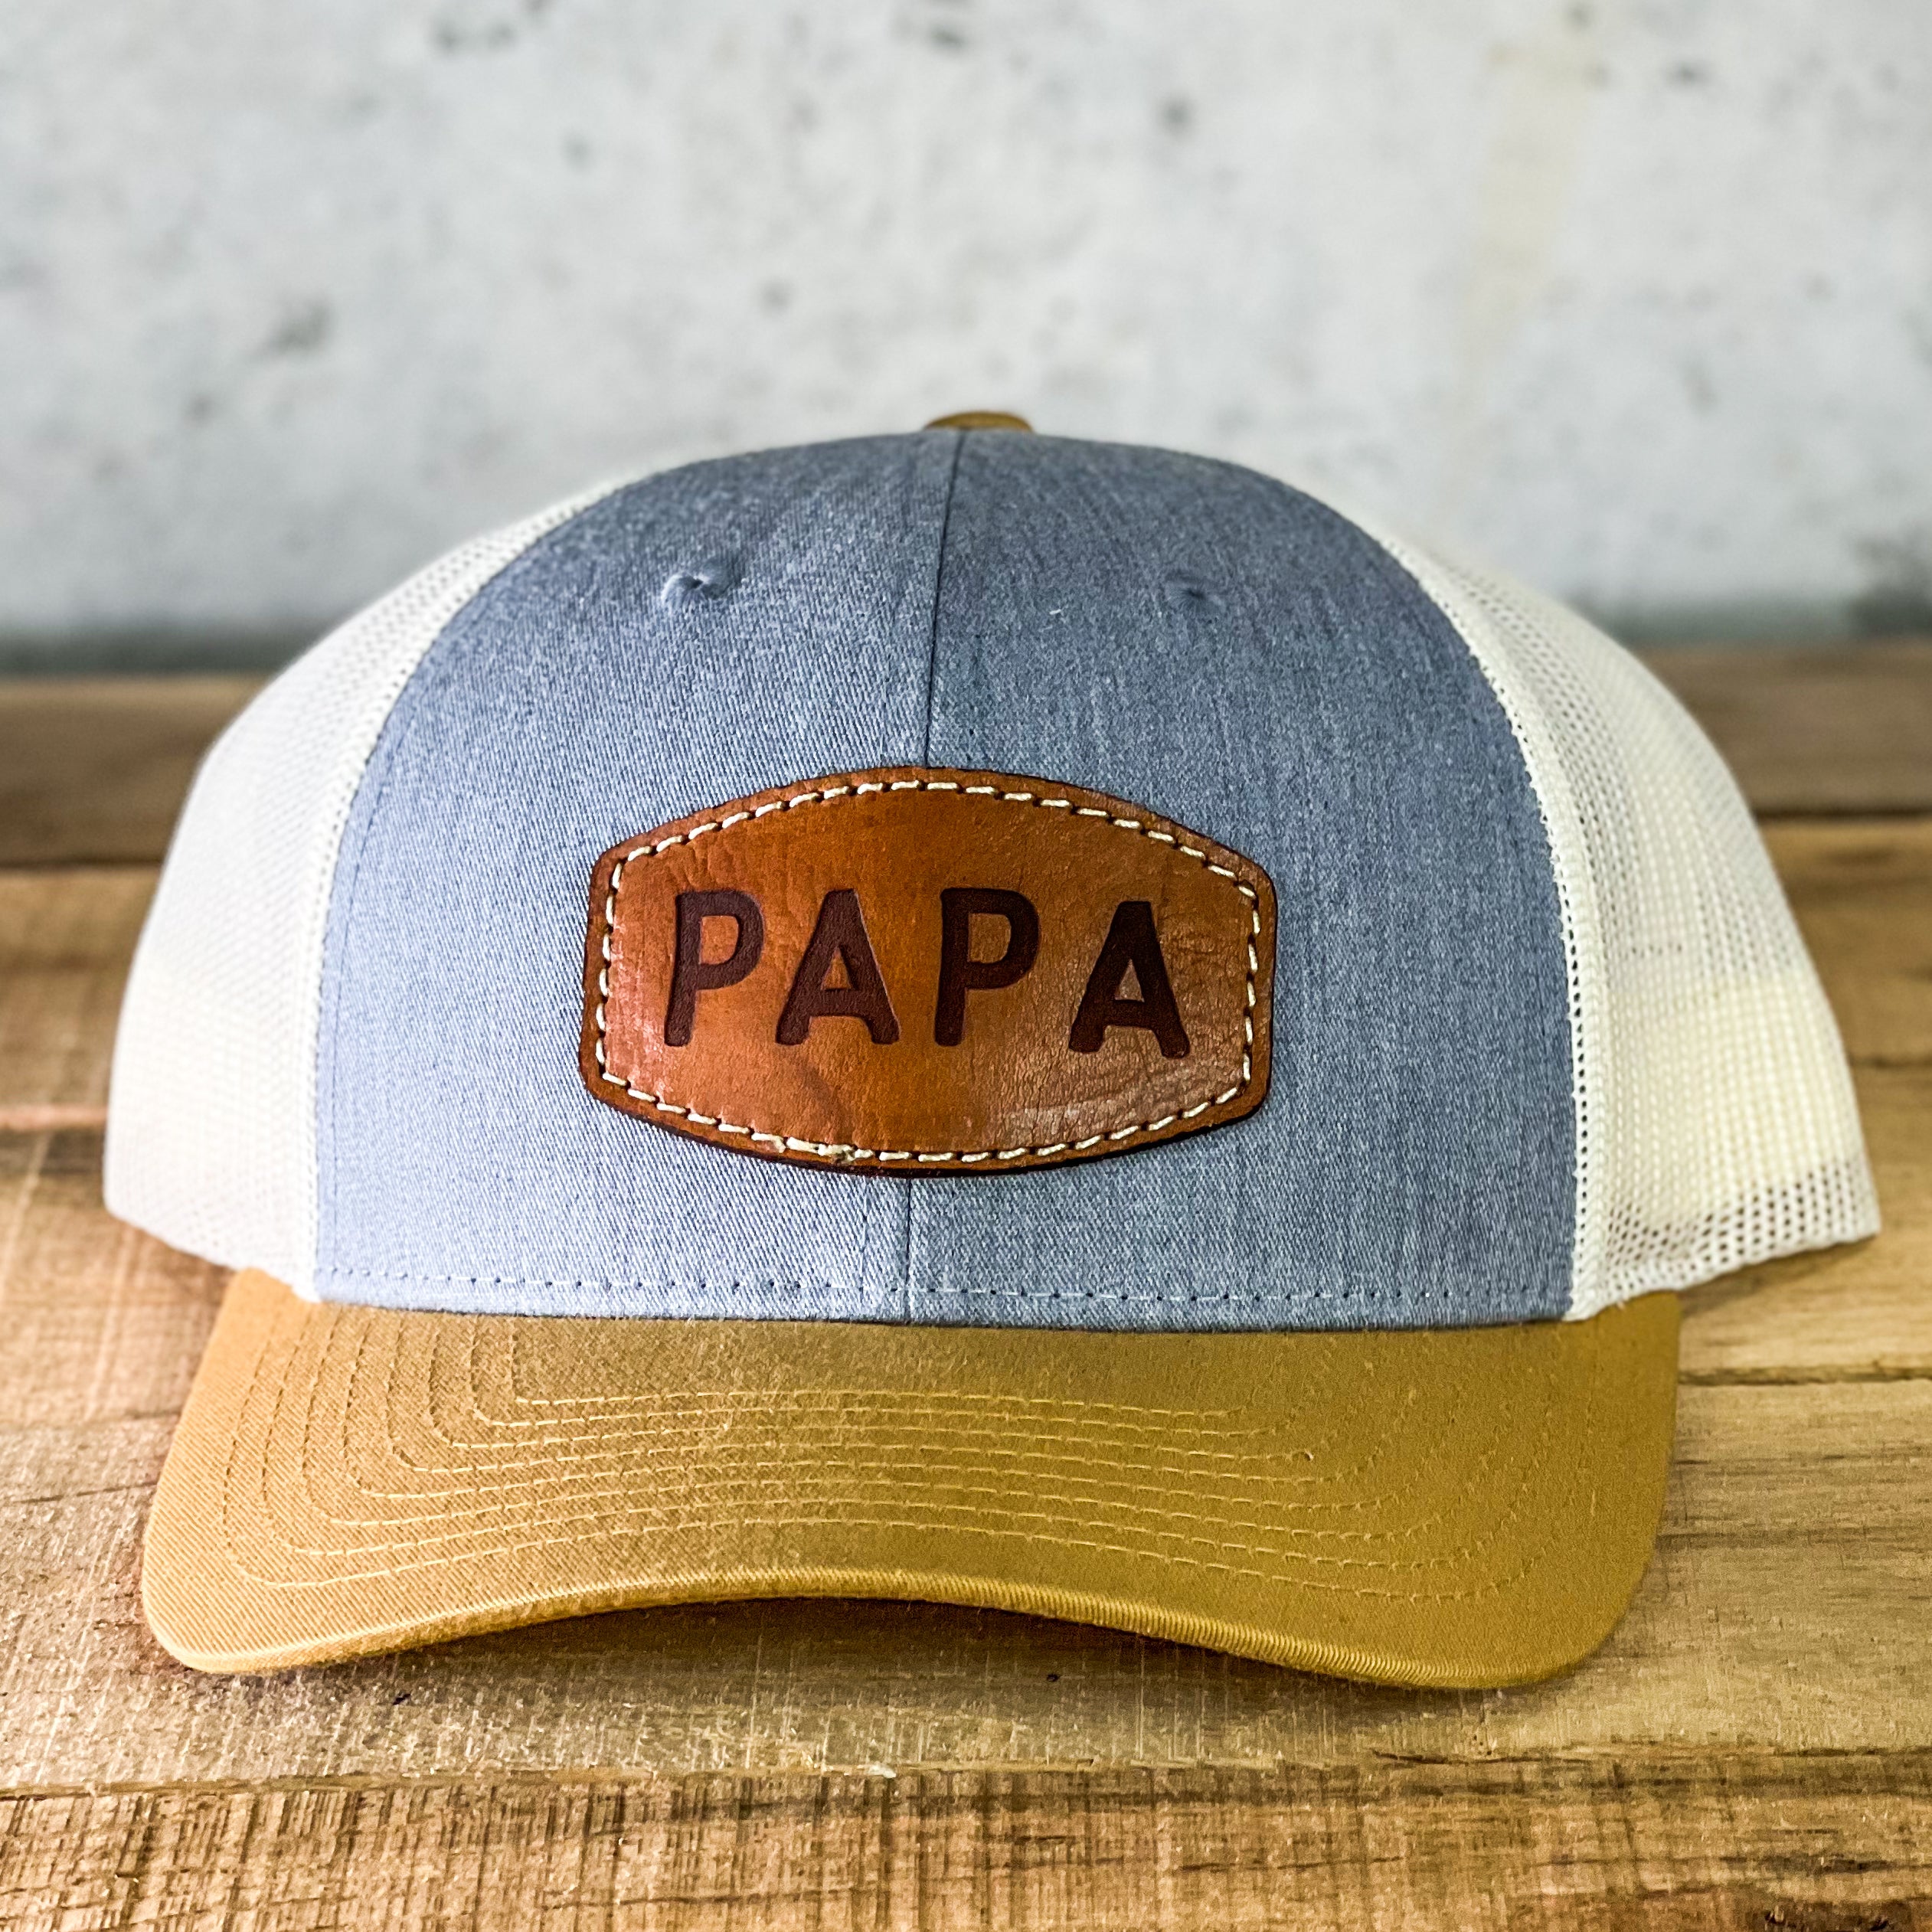 Fathers Day Dad Hat, Real Leather, Dad Hat, Fathers Day, Hats for Dad, New Dad Gift, Leather Dad Hat Dad Bottom Right